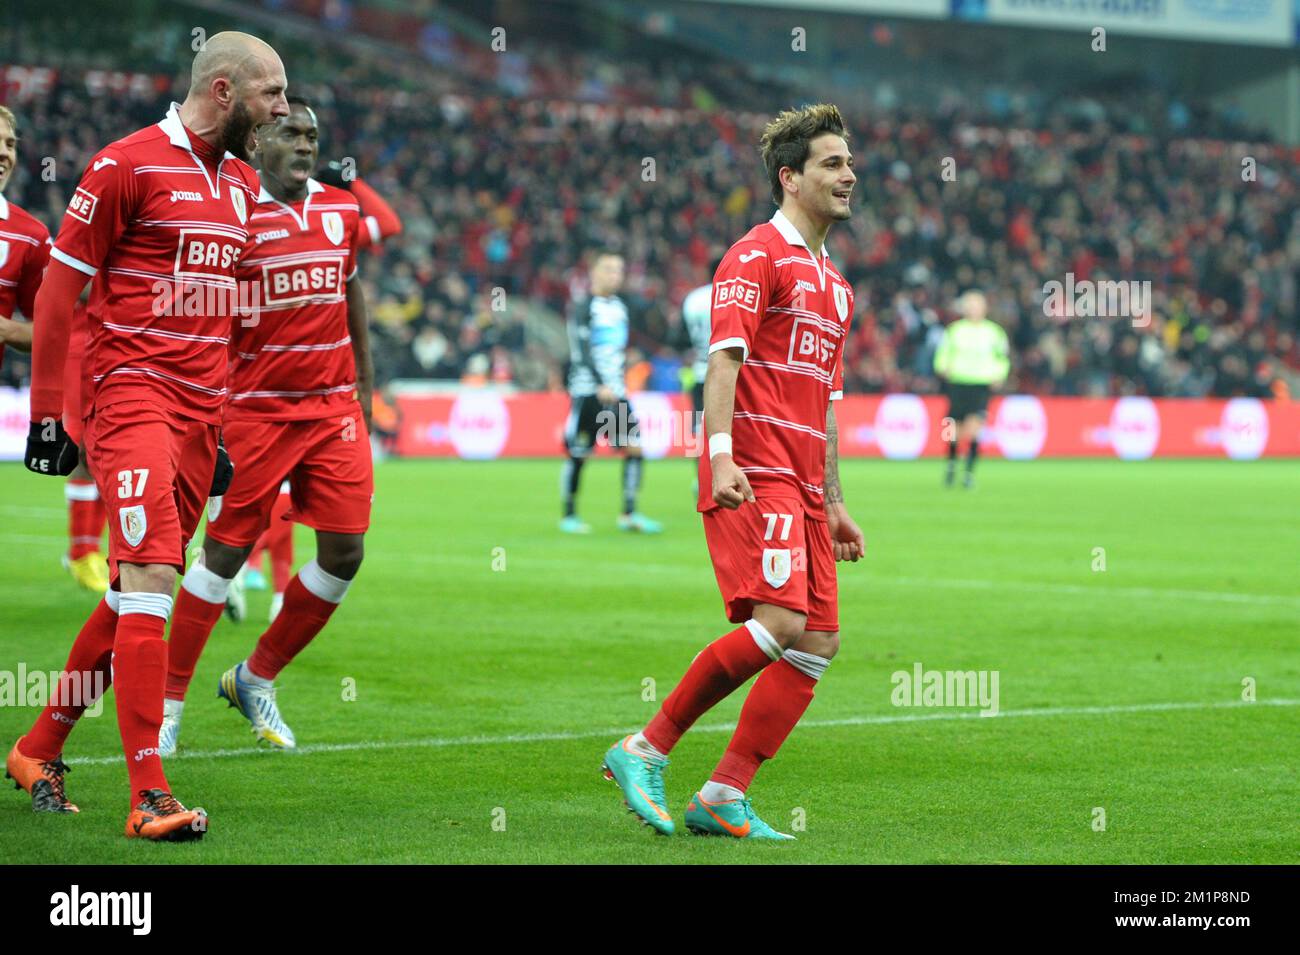 20121207 - LIEGE, BELGIUM: Standard's Maor Bar Buzaglo (R) celebrates after scoring the 3-0 goal during the Jupiler Pro League match between Standard and Charleroi, in Liege, Friday 07 December 2012, on day 19 of the Belgian soccer championship. BELGA PHOTO YORICK JANSENS Stock Photo